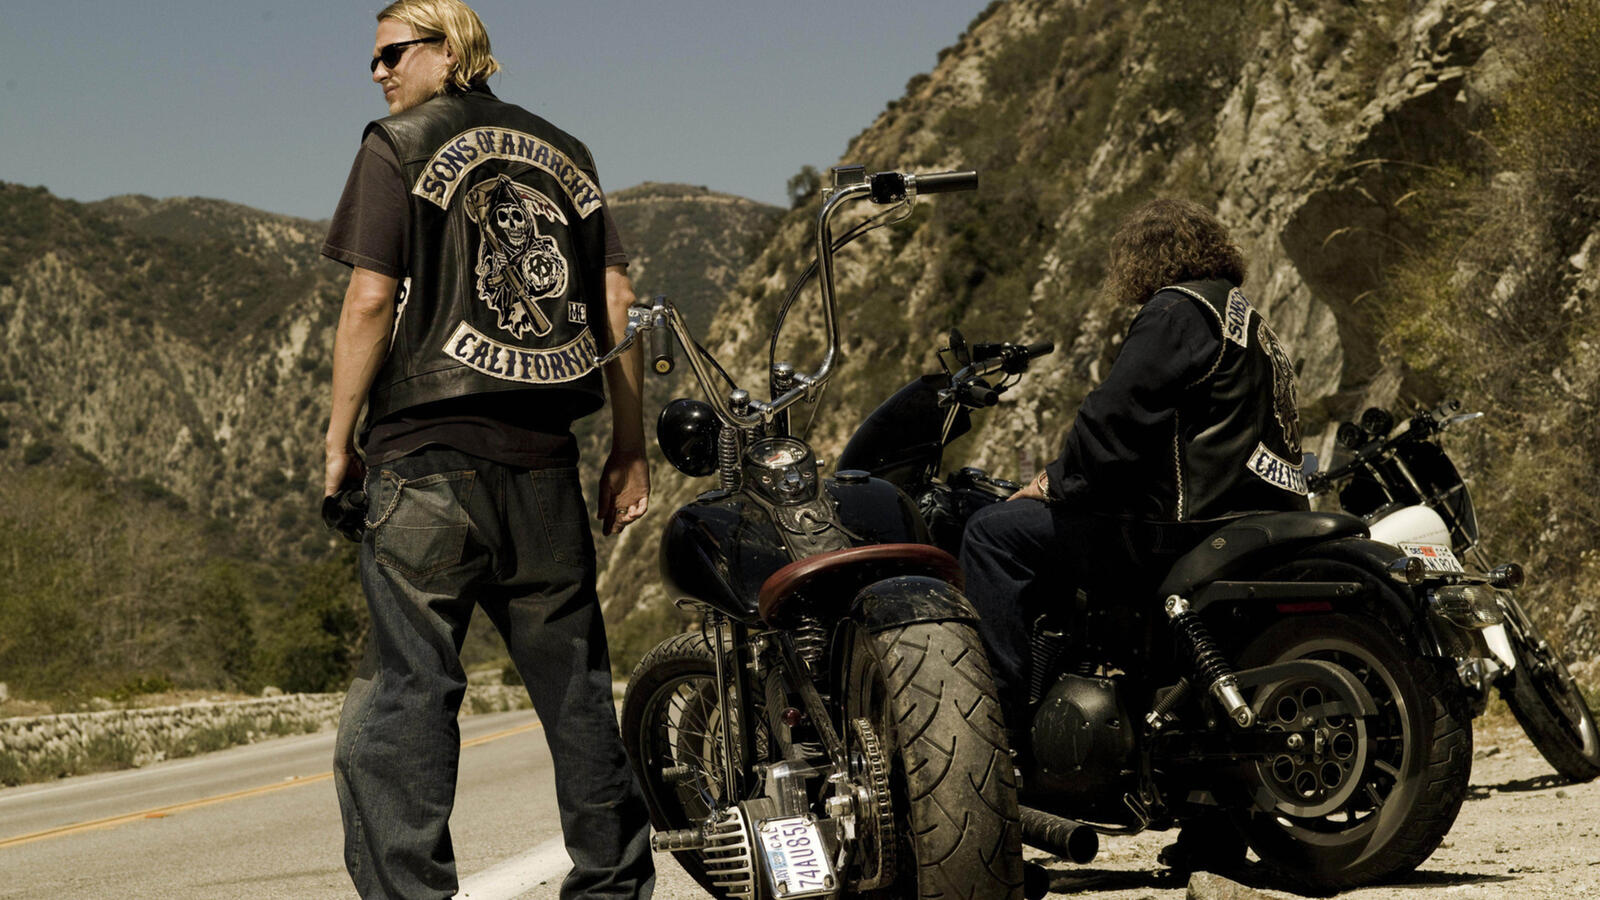 Wallpapers motorcycle car sons of anarchy on the desktop